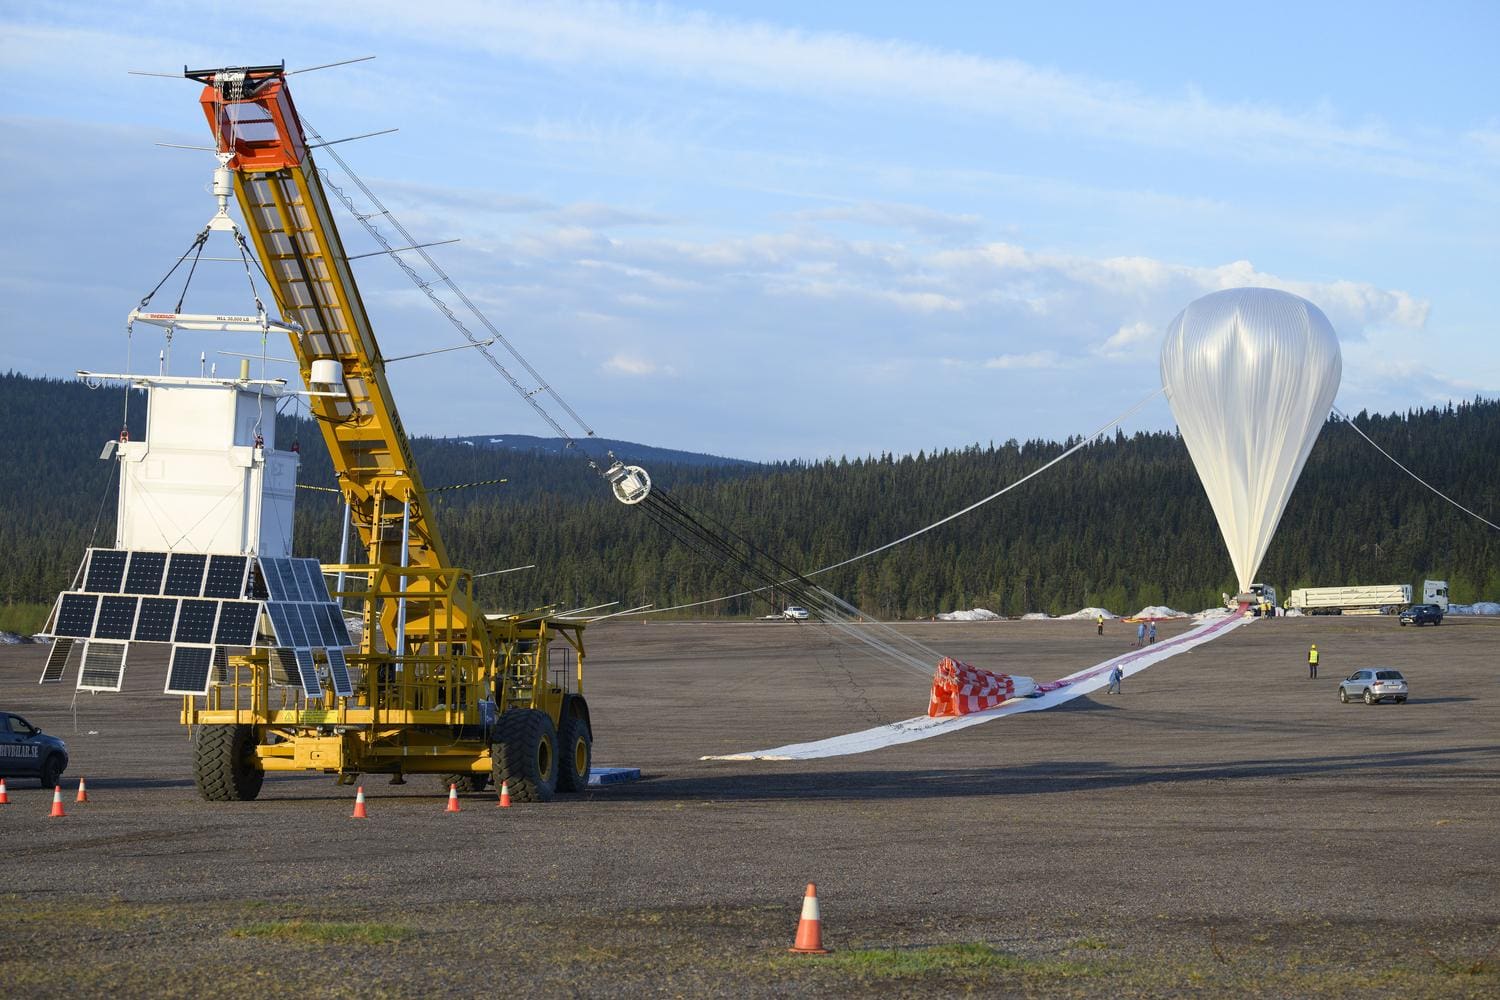 Historic giant balloon to be launched from Esrange